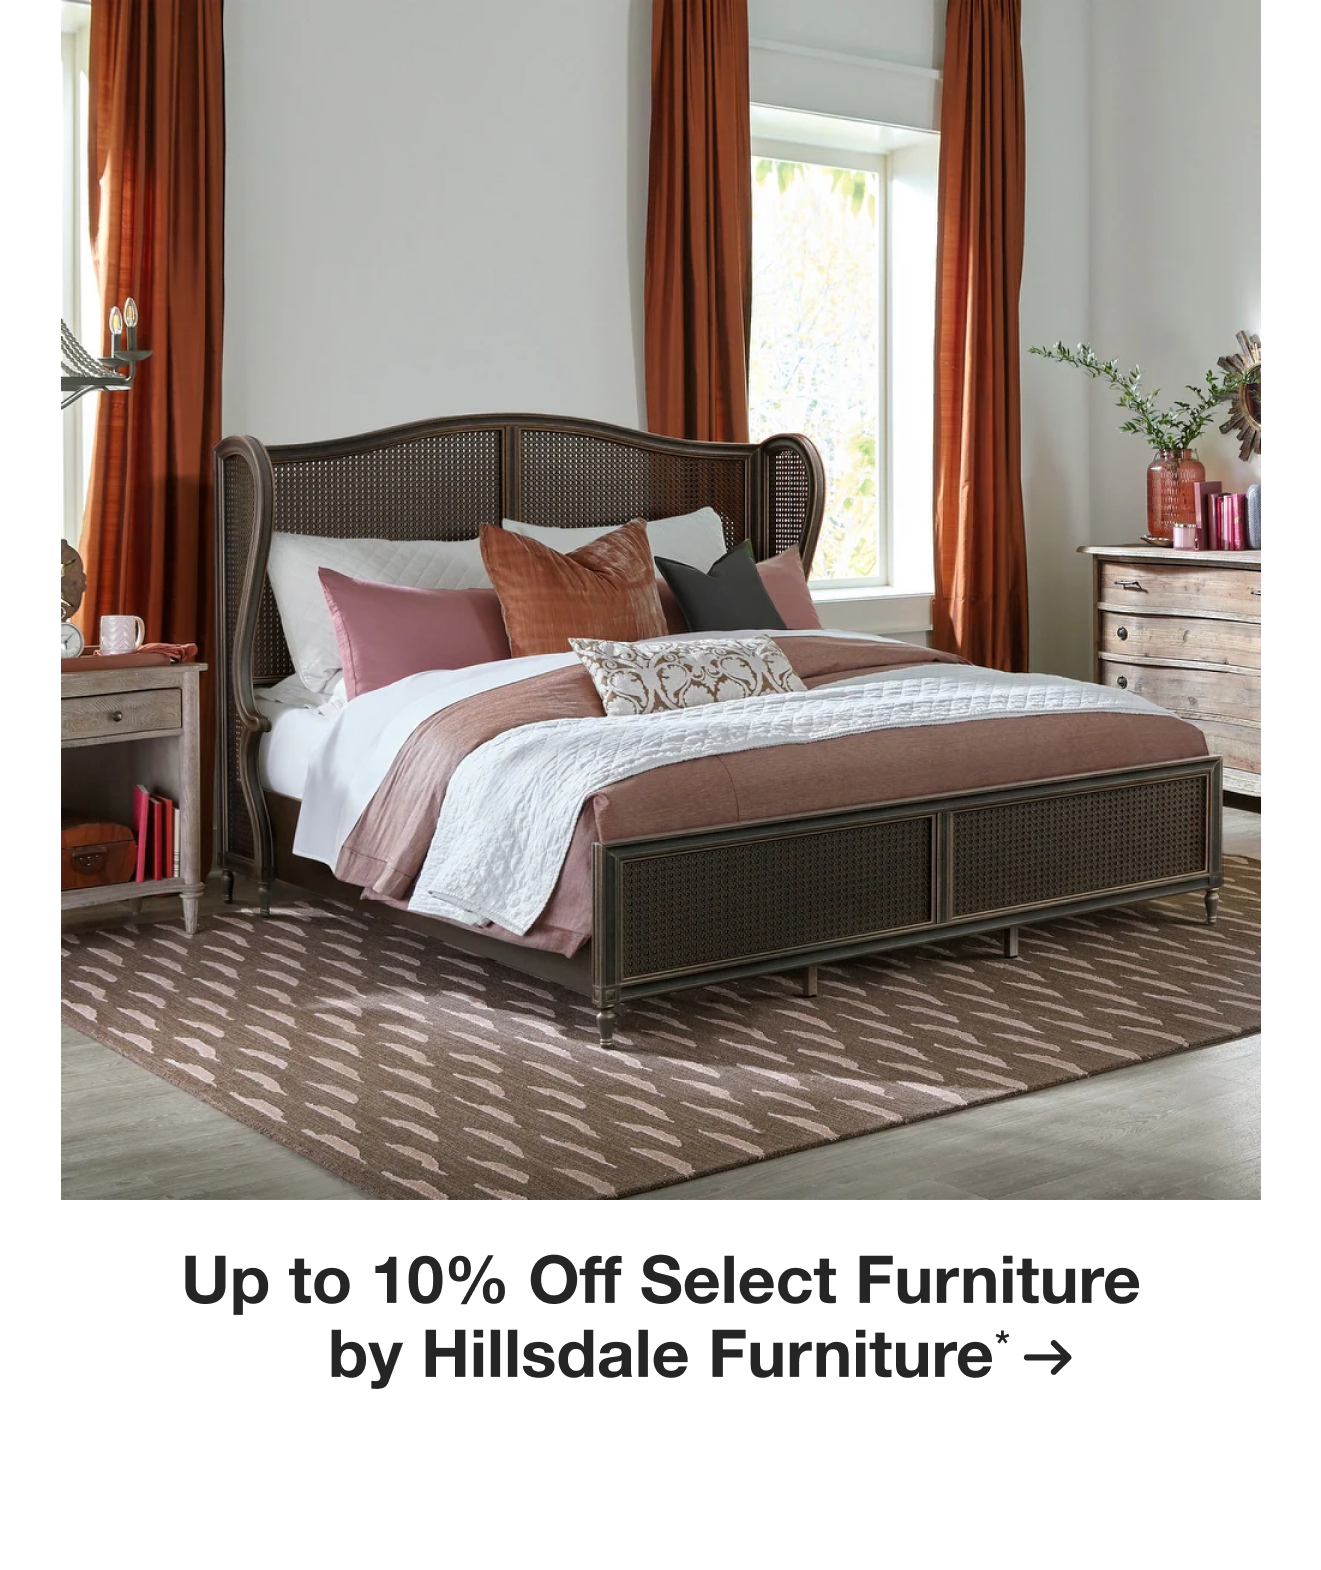 Up to 10% Off Select Furniture by Hillsdale Furniture*